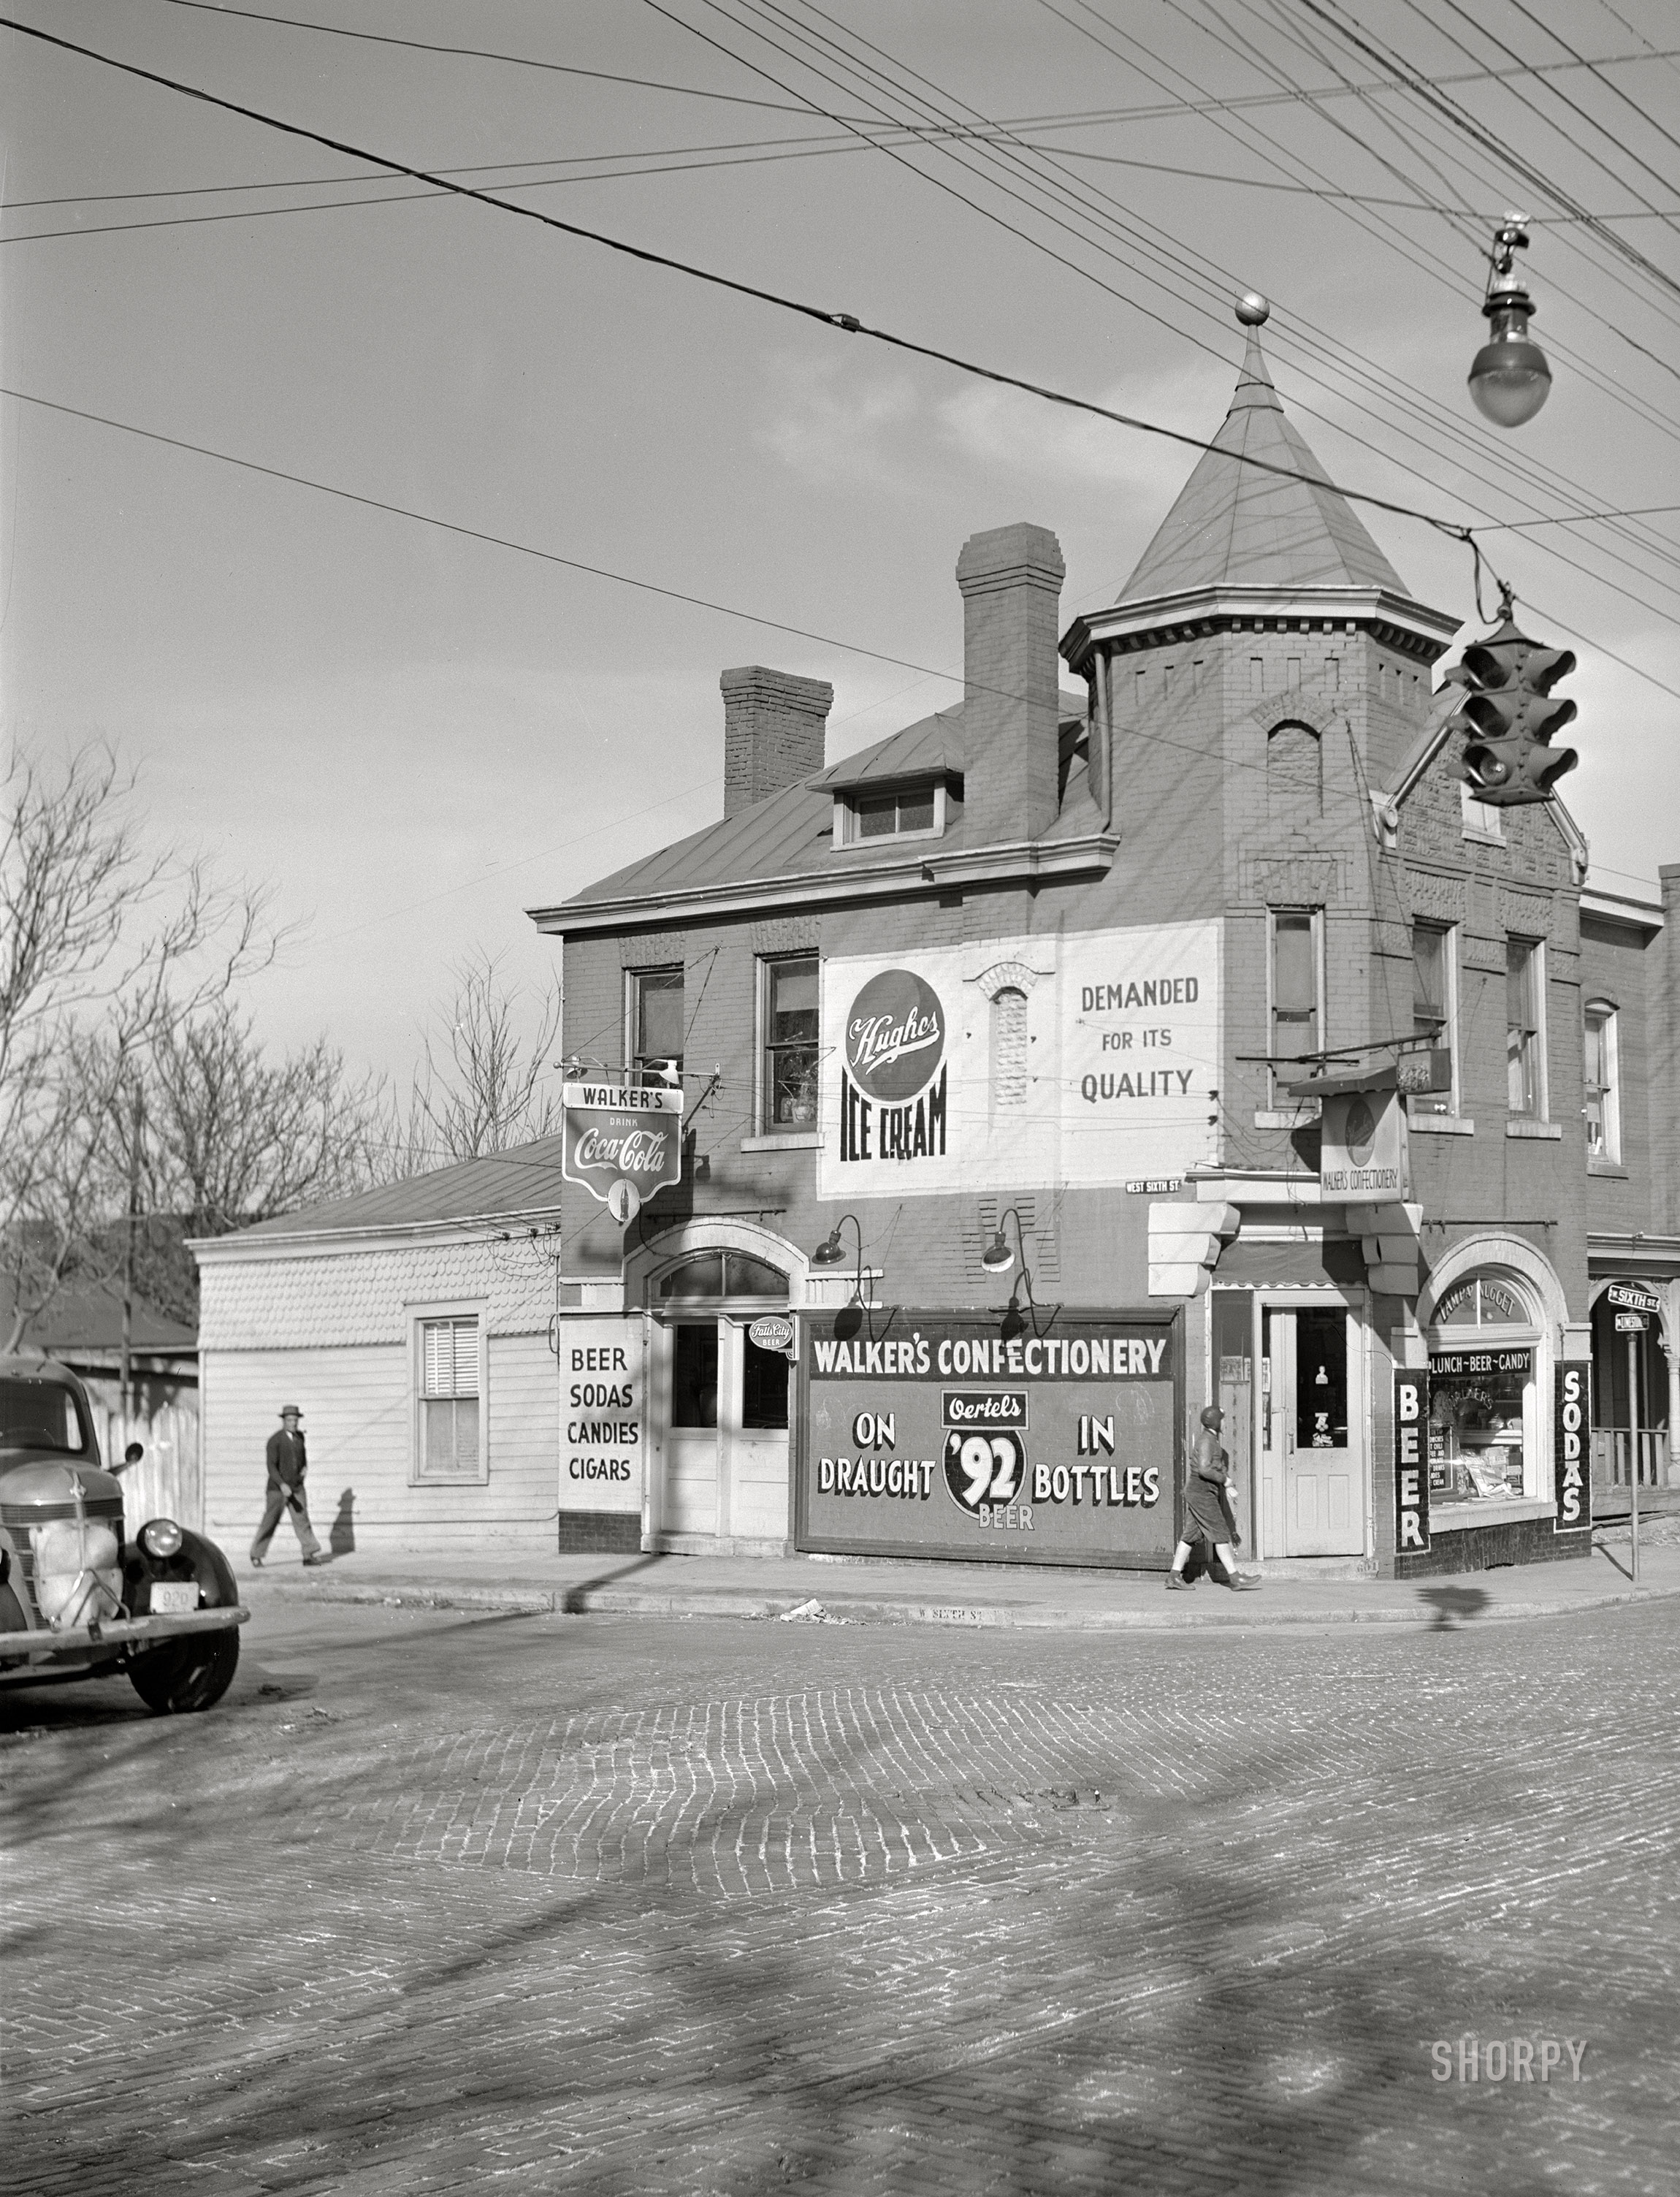 November 1940. "Corner store in Lexington, Kentucky." Medium format acetate negative by John Vachon for the Farm Security Administration. View full size.